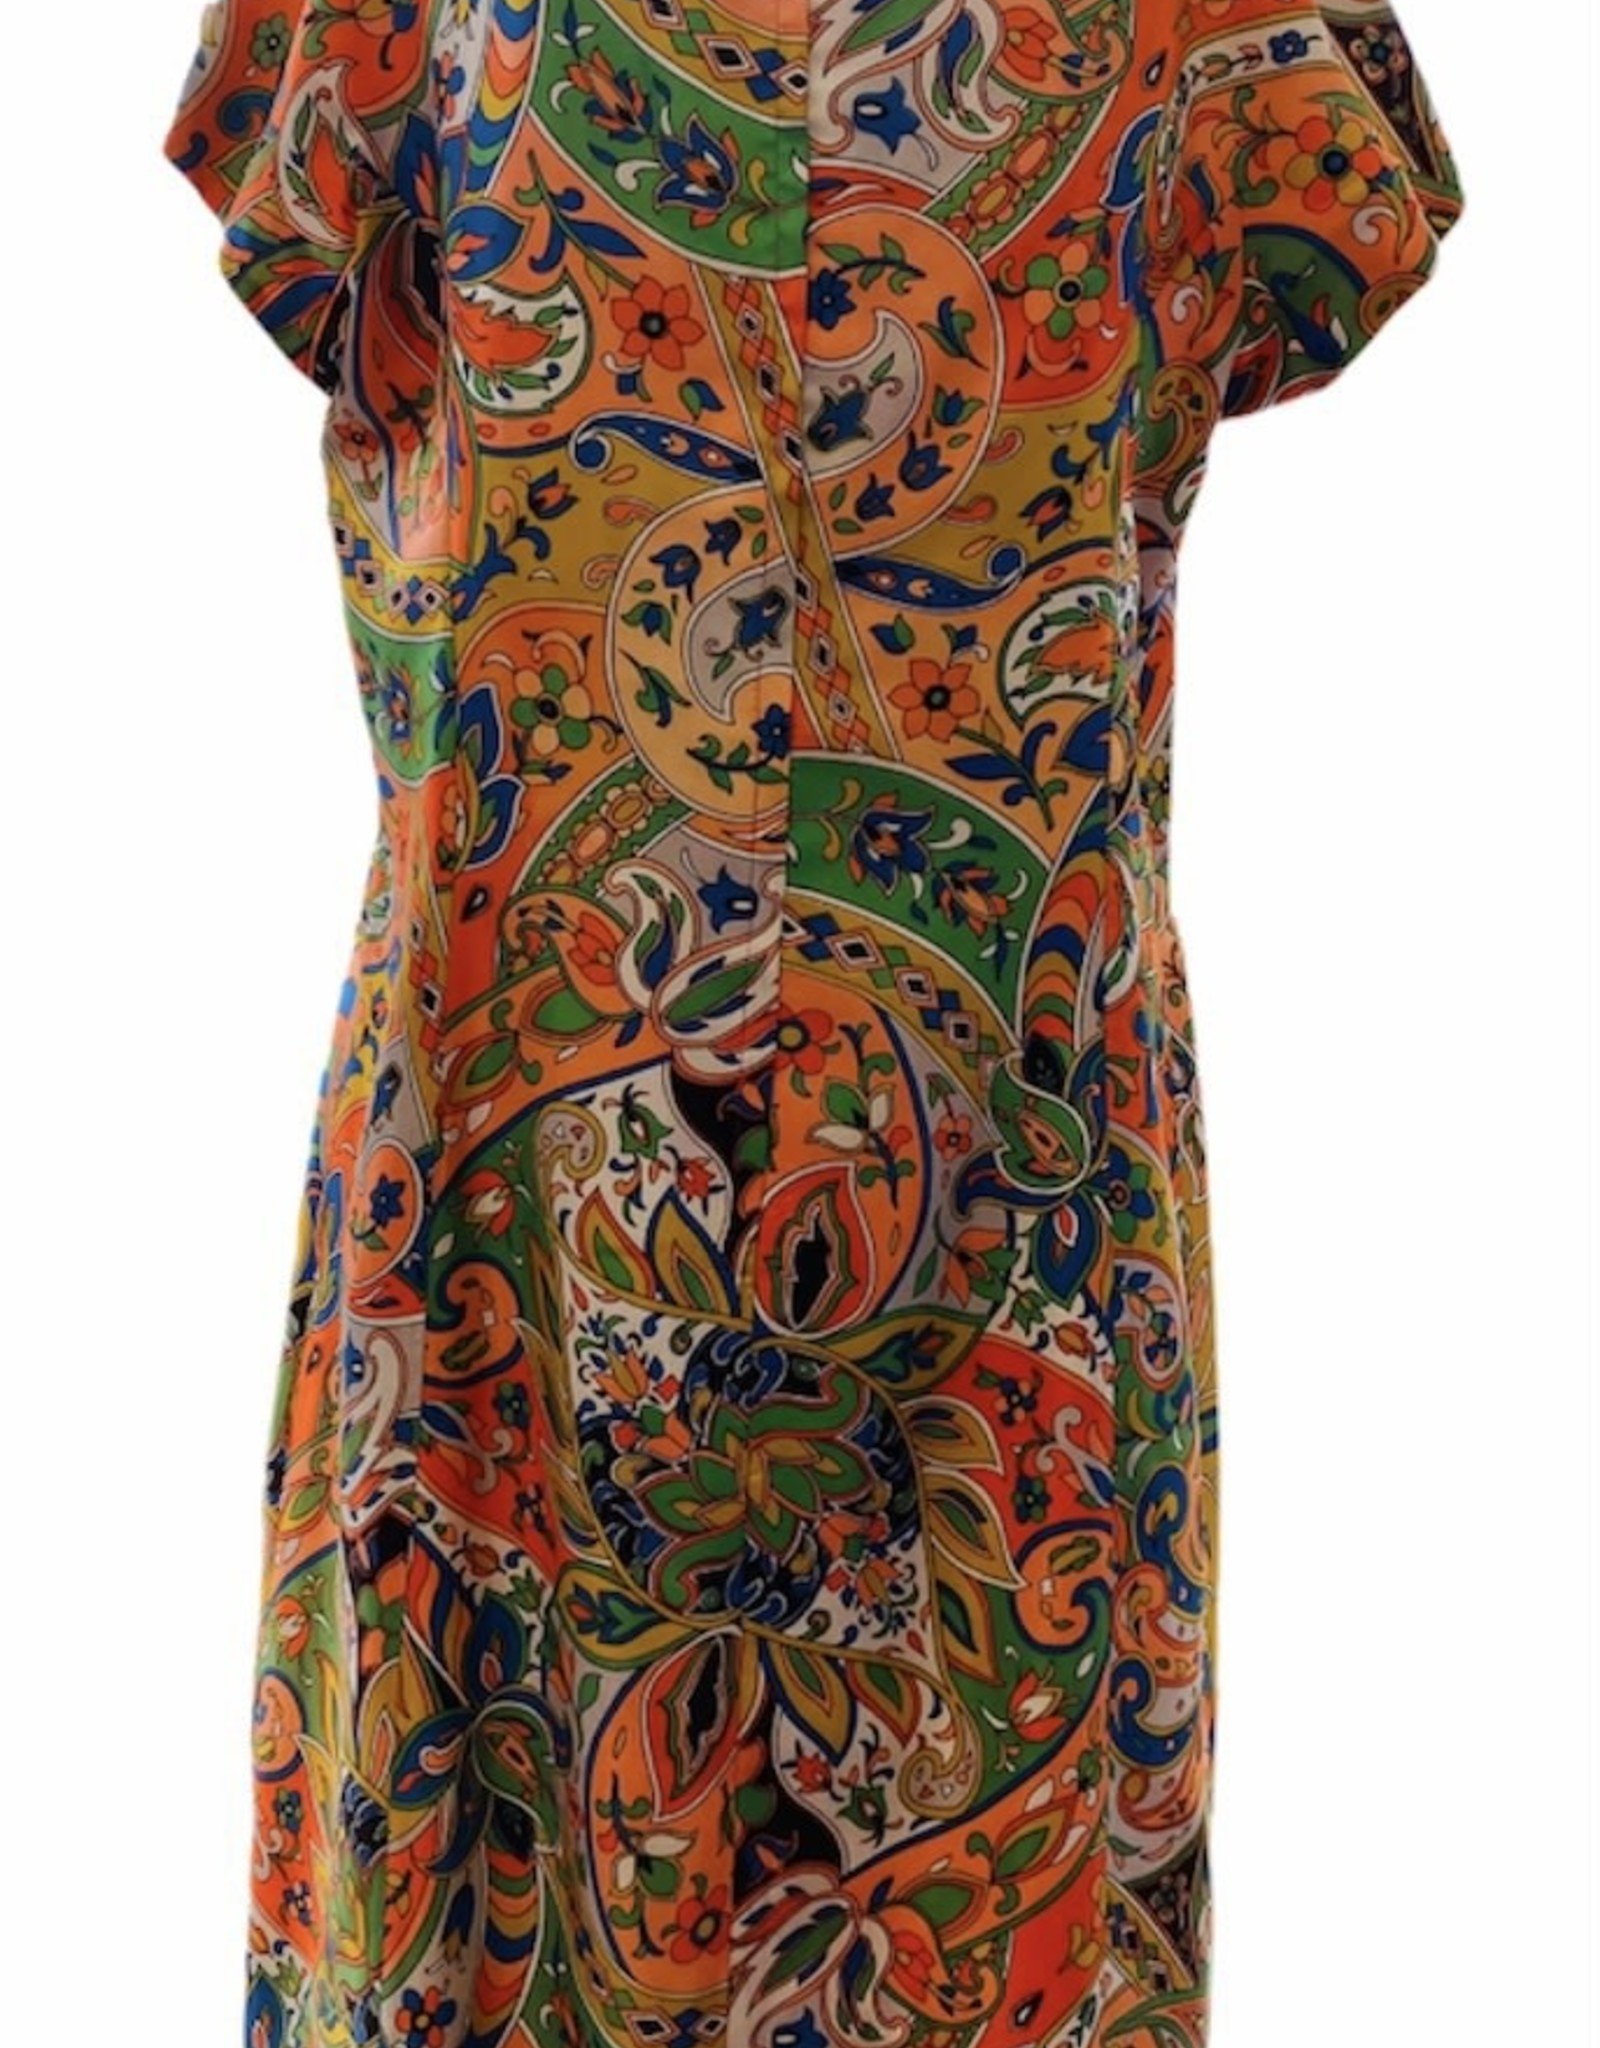 60s Paisley peach and pink dress